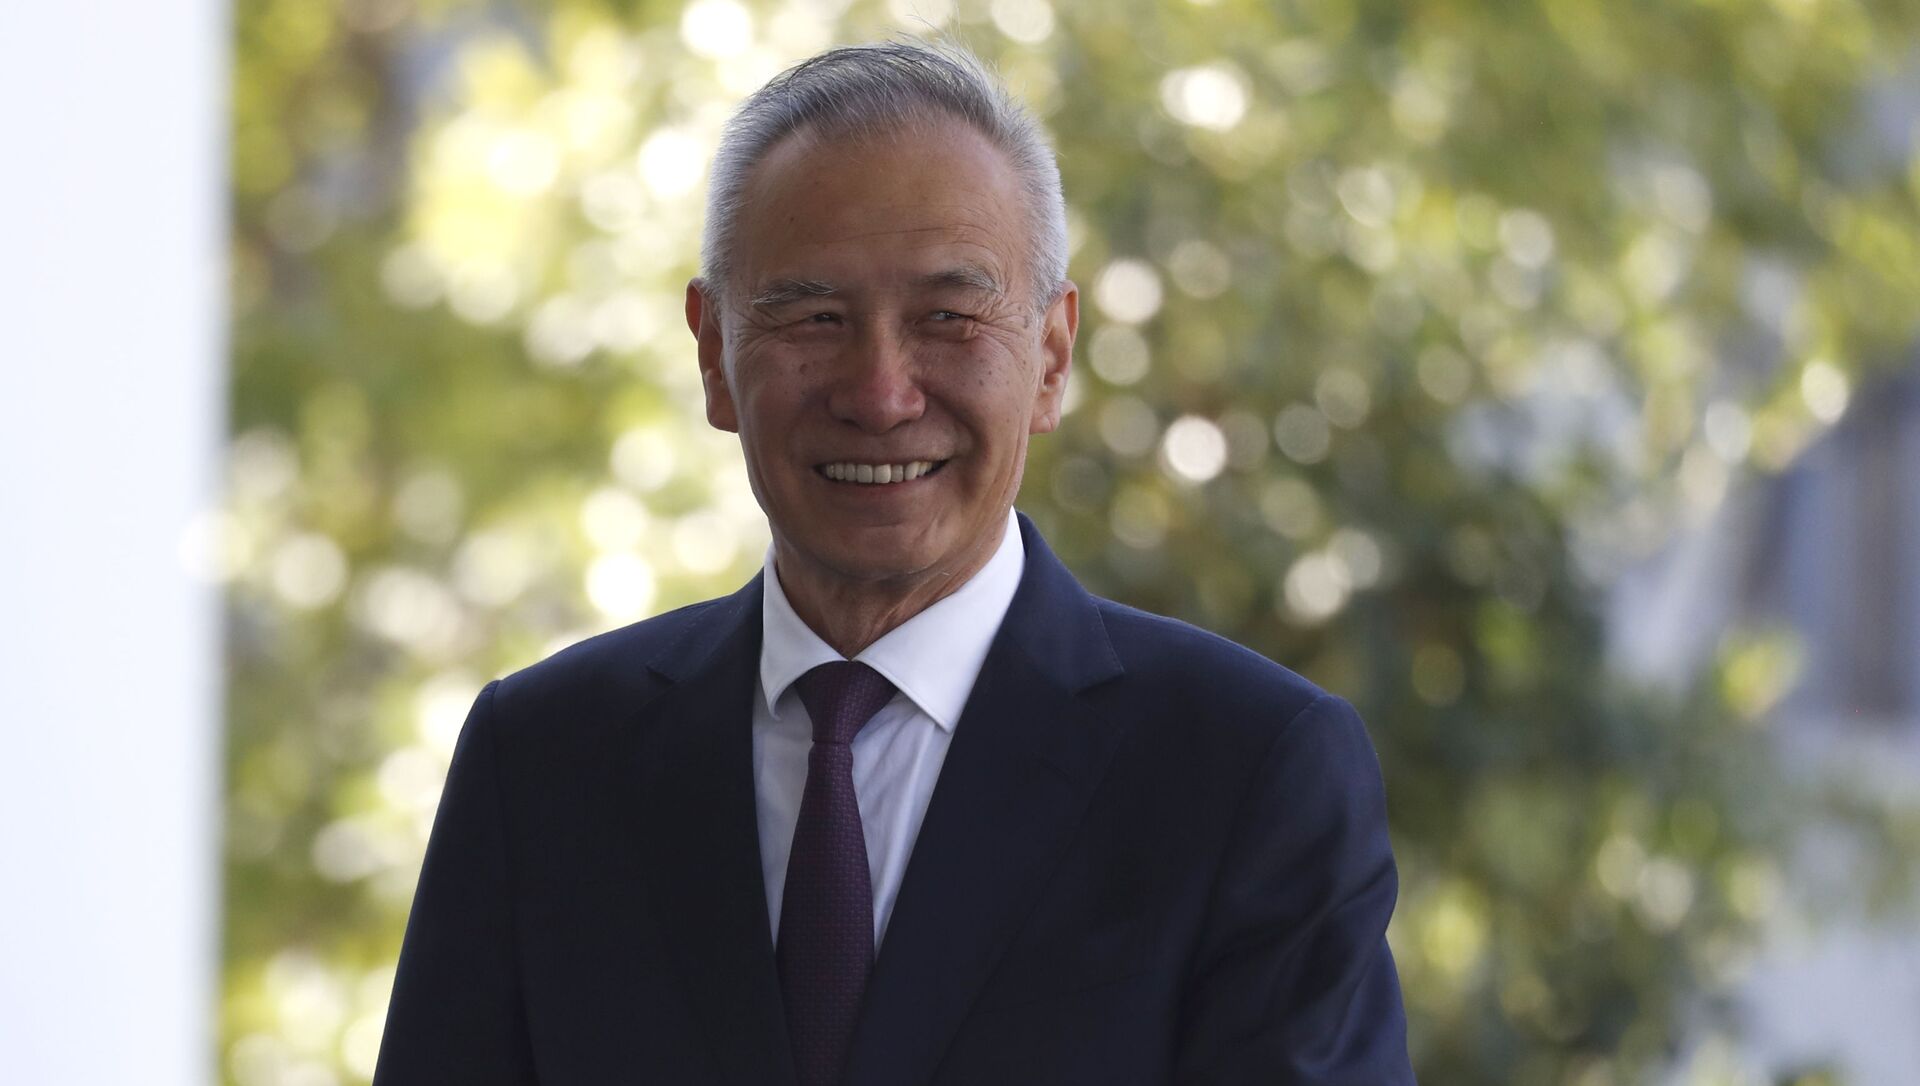 China's Vice Premier Liu He arrives at the West Wing for a meeting with President Donald Trump, Friday, Oct. 11, 2019, at the White House in Washington.  - Sputnik Việt Nam, 1920, 27.05.2021